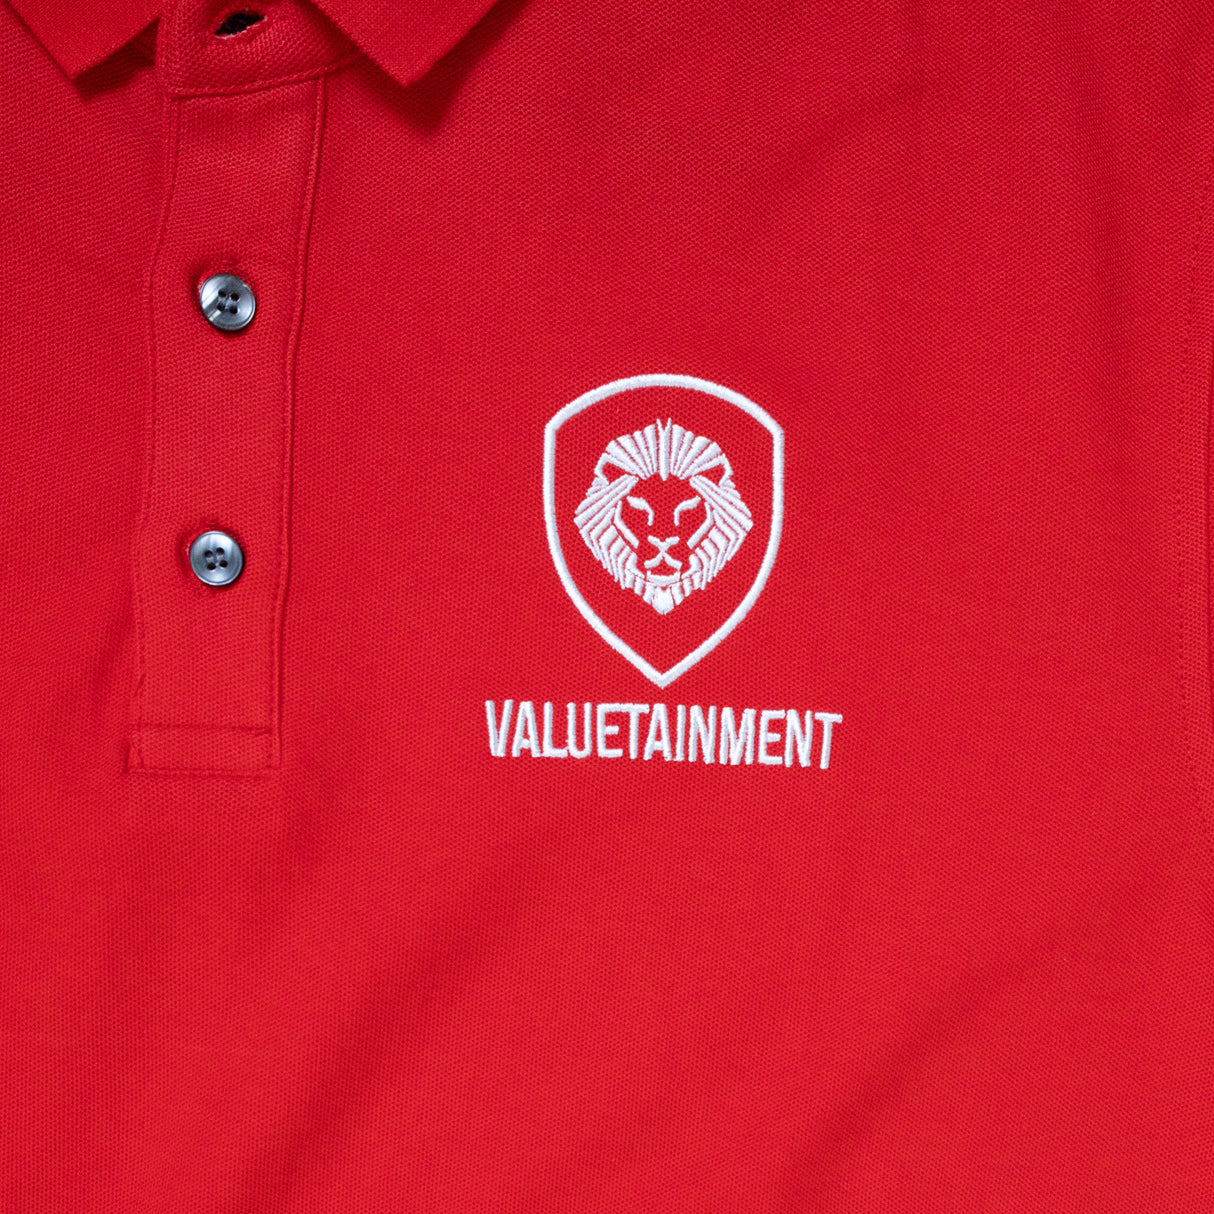 Valuetainment Polo - Red